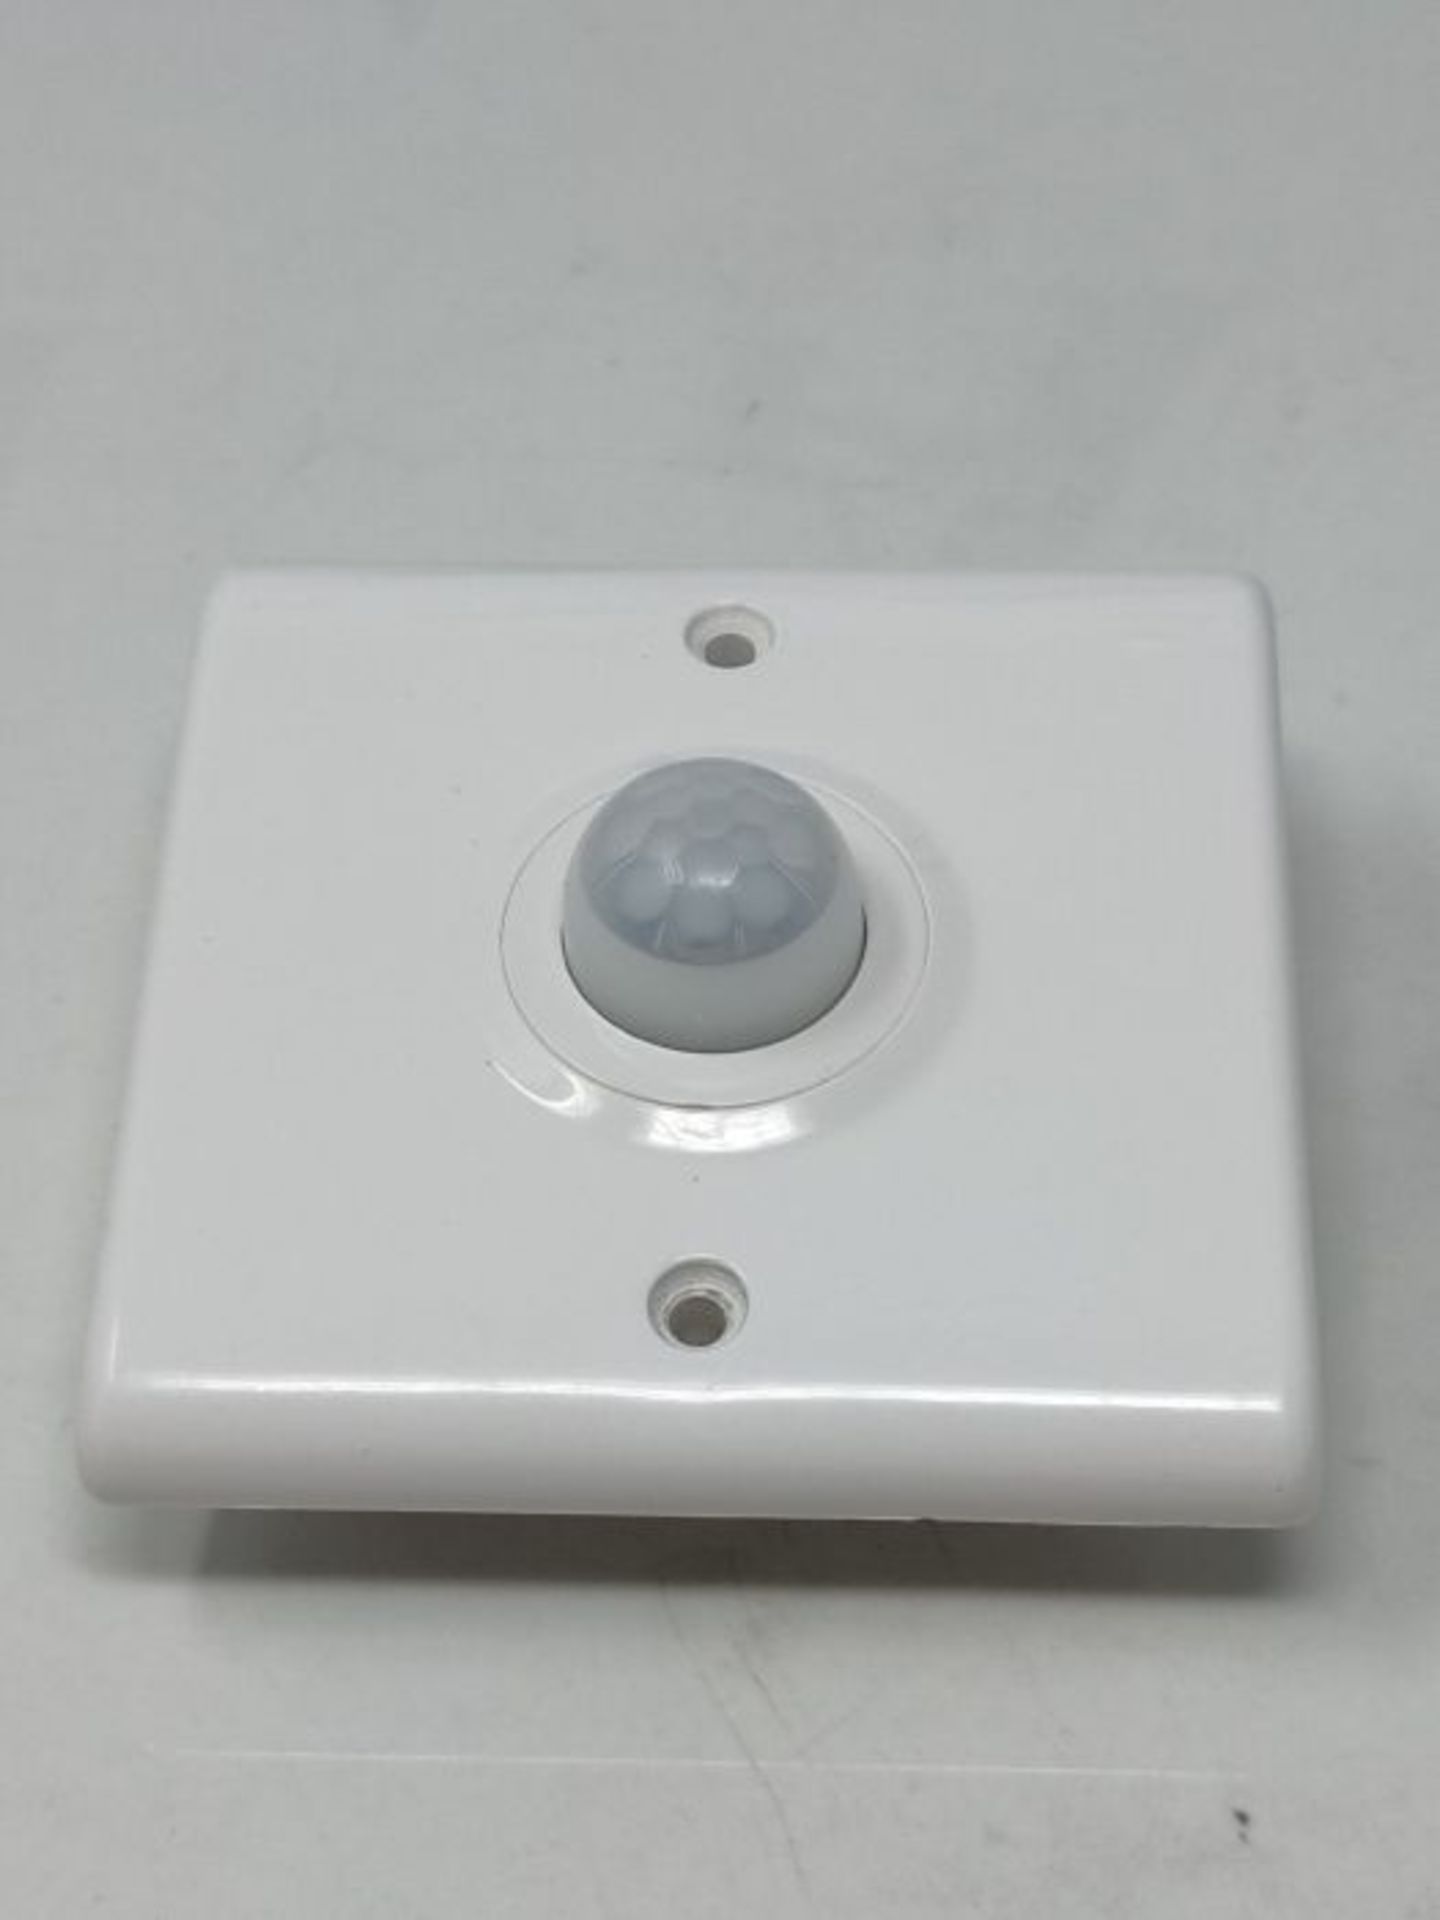 RRP £59.00 Elkay Columbus PIR Sensor with Timer and lux Adjustment, ABS, White, Standard Switch S - Image 2 of 3